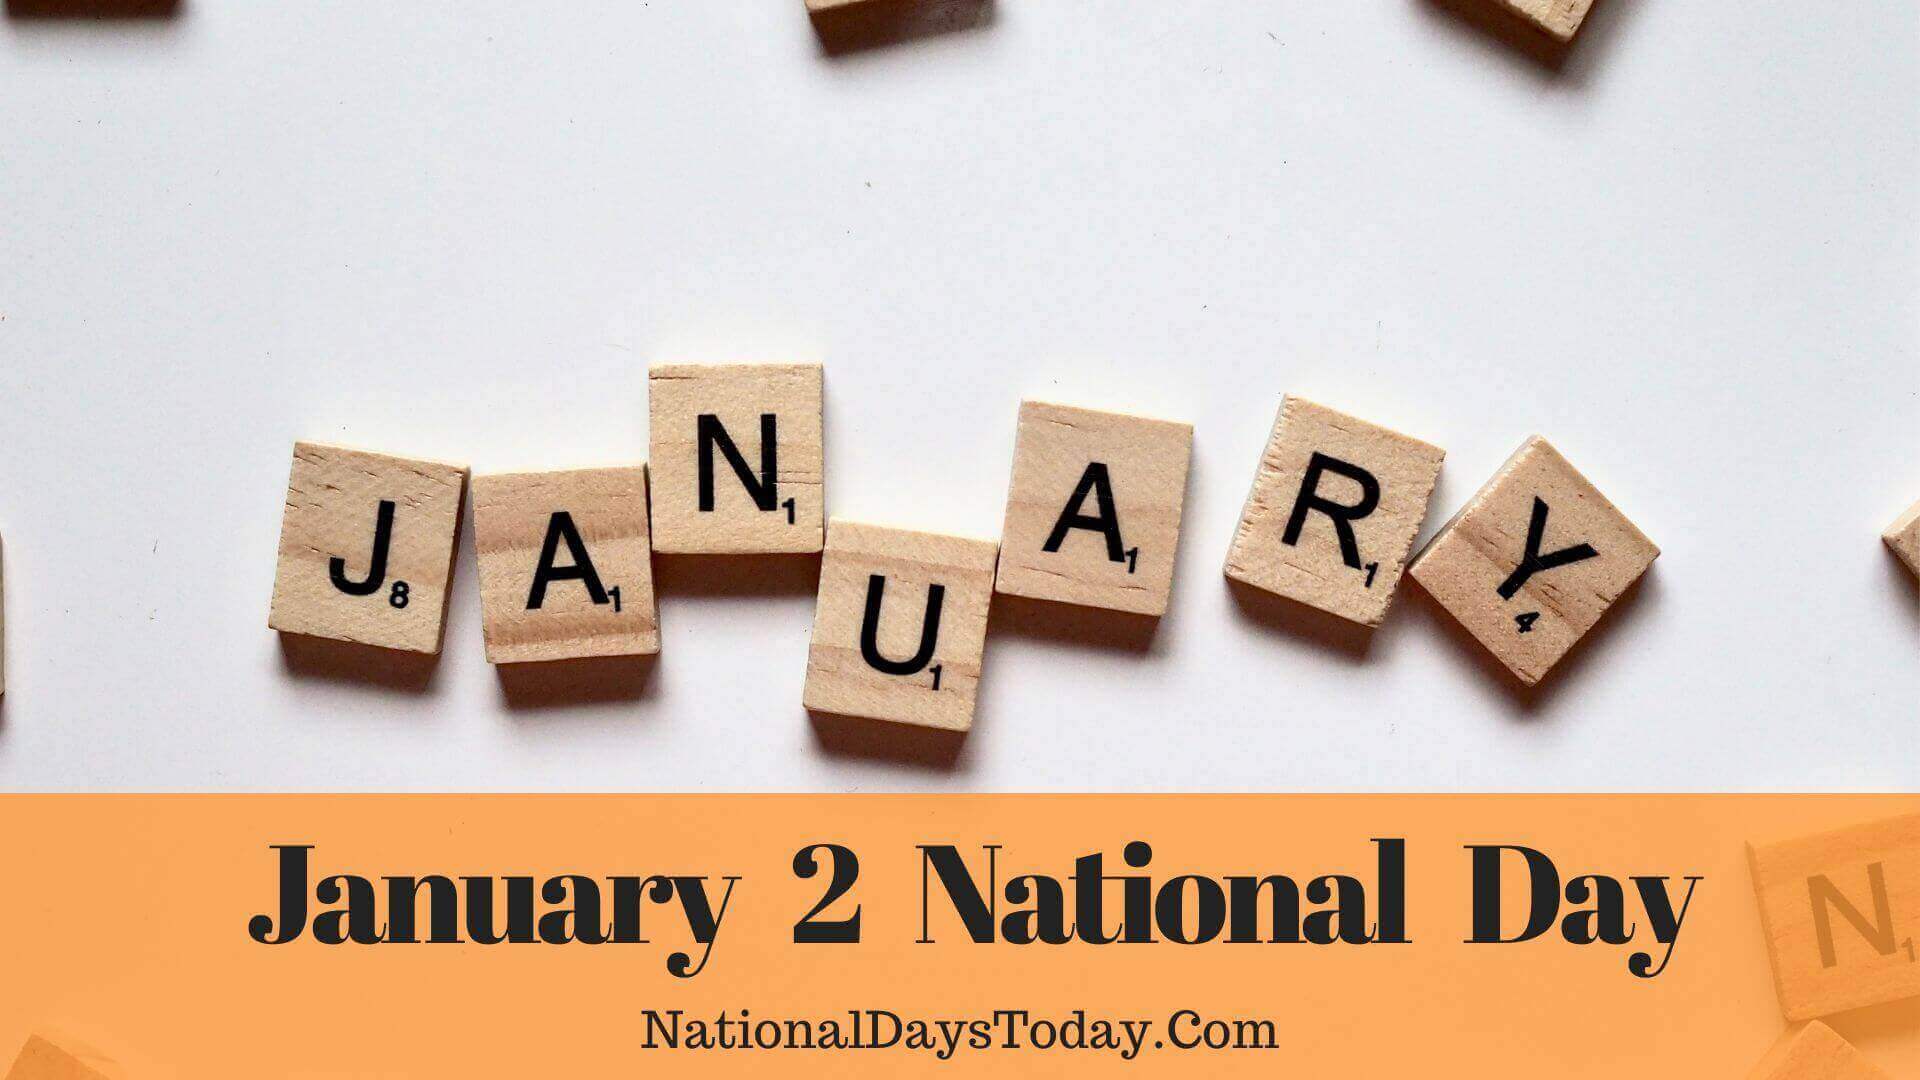 January 2 National Day